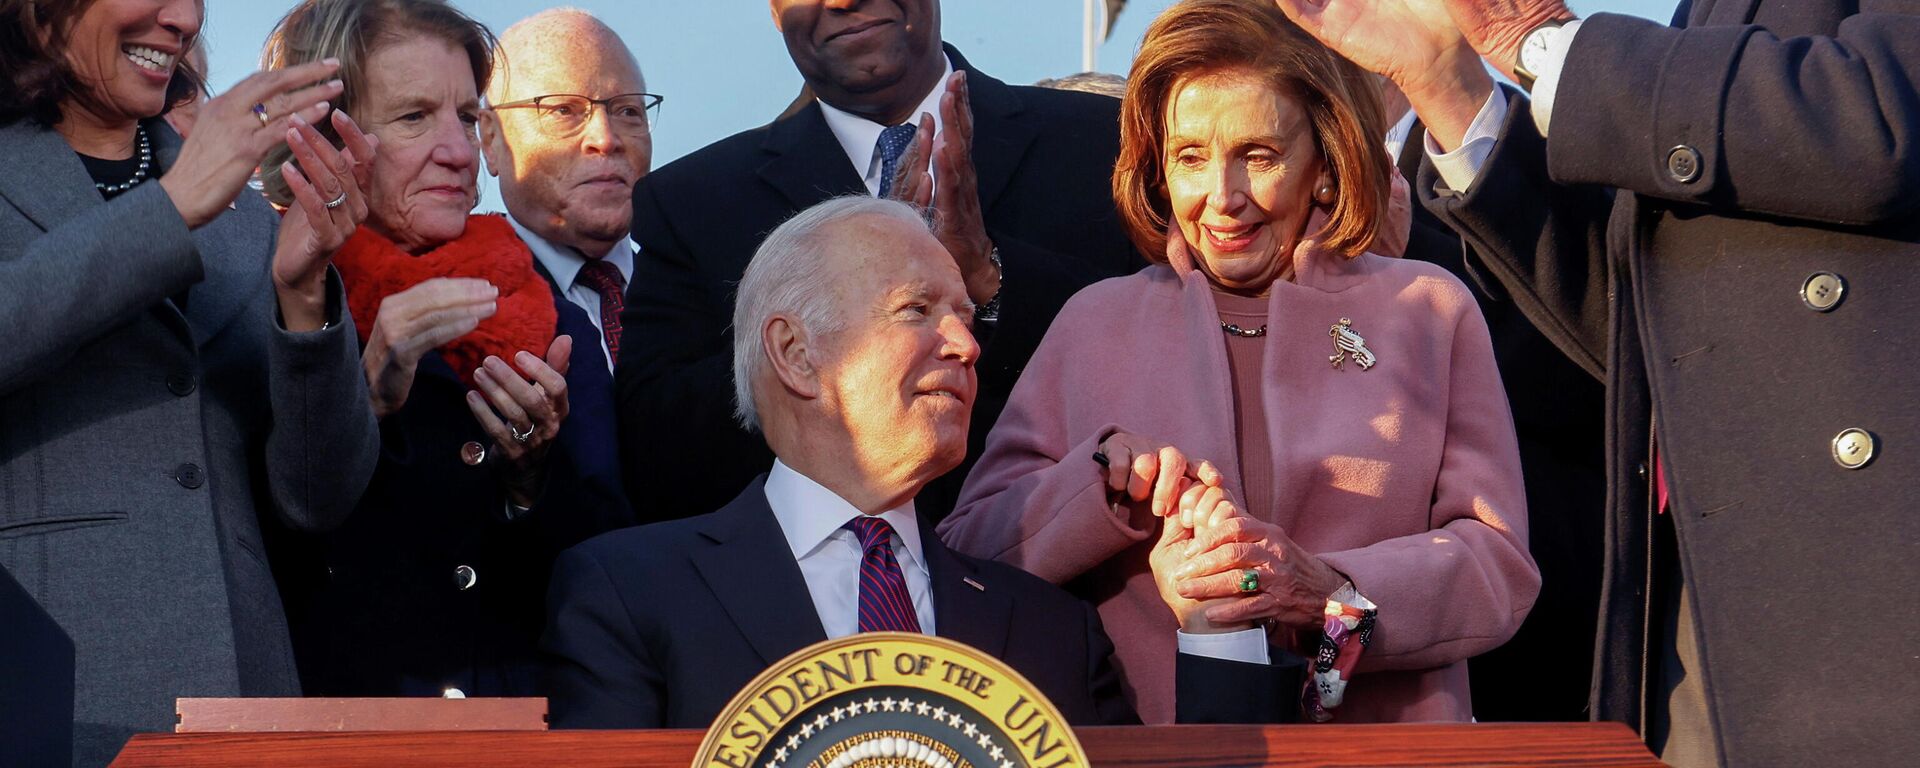 U.S. President Joe Biden celebrates with lawmakers including House Speaker Nancy Pelosi (D-CA) and Senate Majority Leader Chuck Schumer (D-NY) after signing the Infrastructure Investment and Jobs Act on the South Lawn at the White House in Washington, U.S. November 15, 2021 - Sputnik International, 1920, 27.11.2021